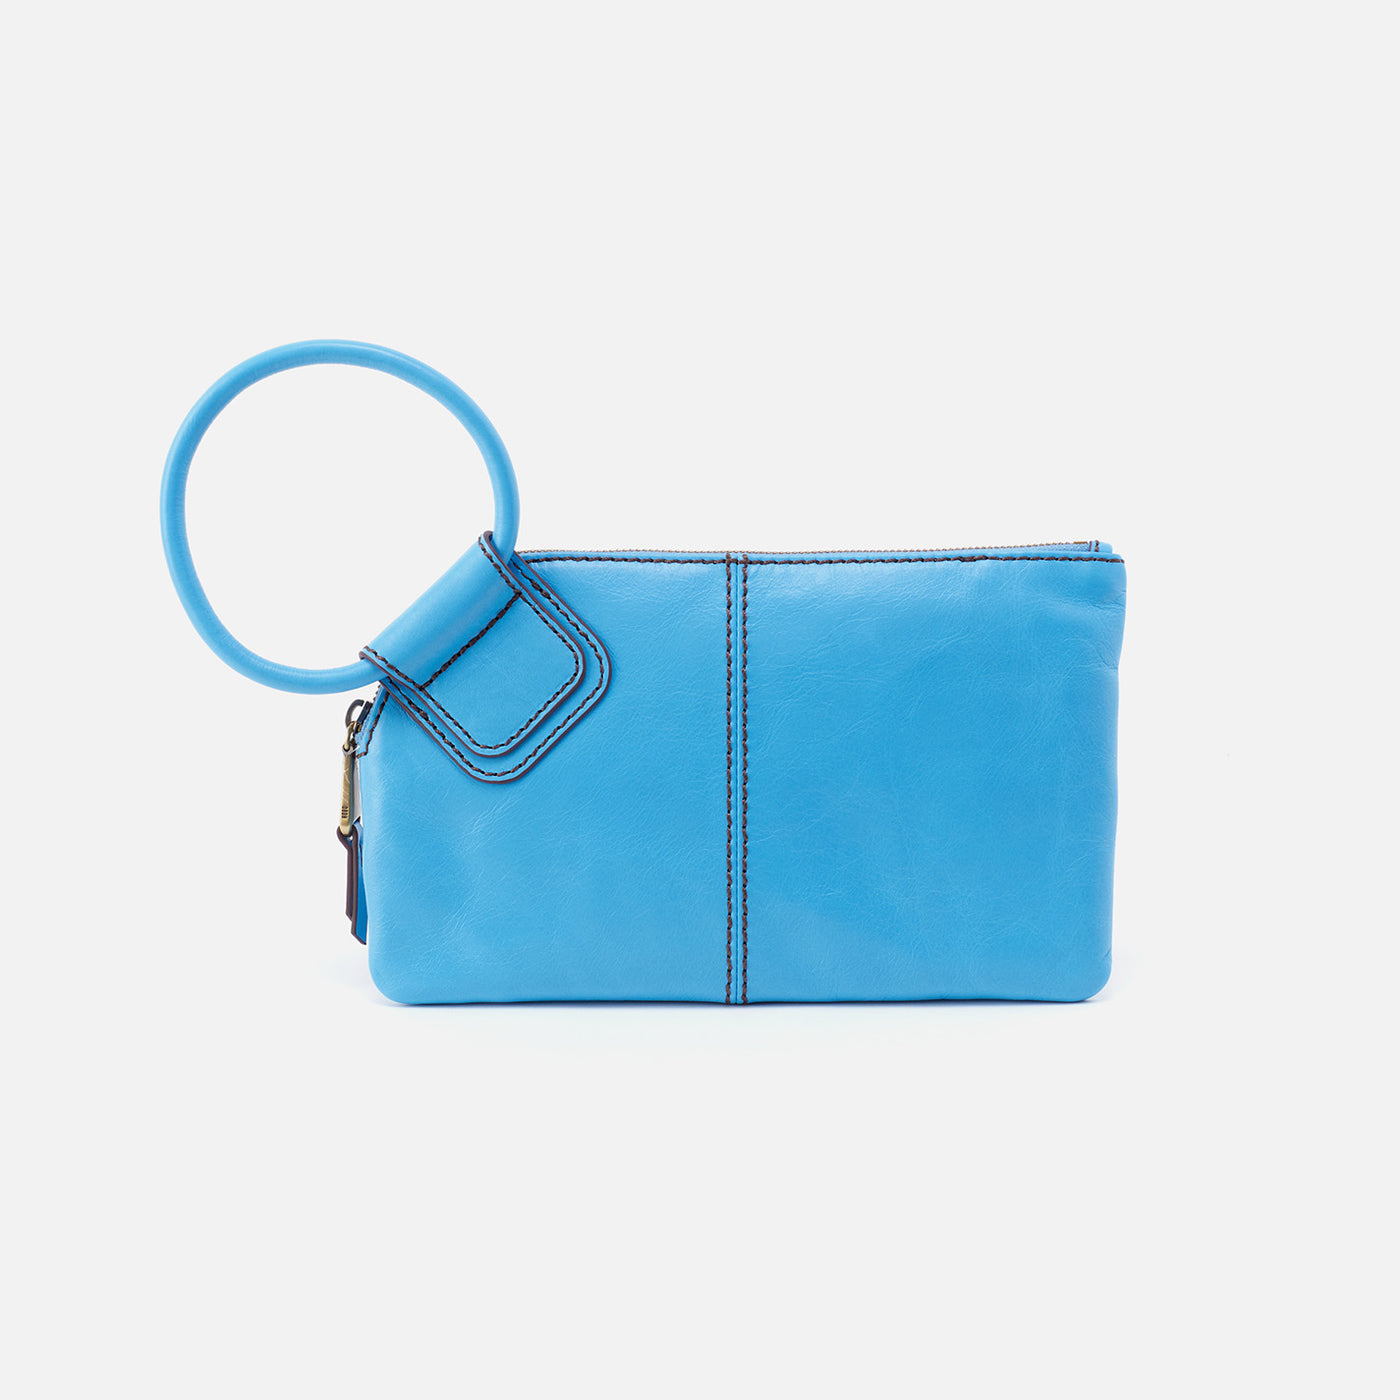 Sable Wristlet in Polished Leather - Tranquil Blue